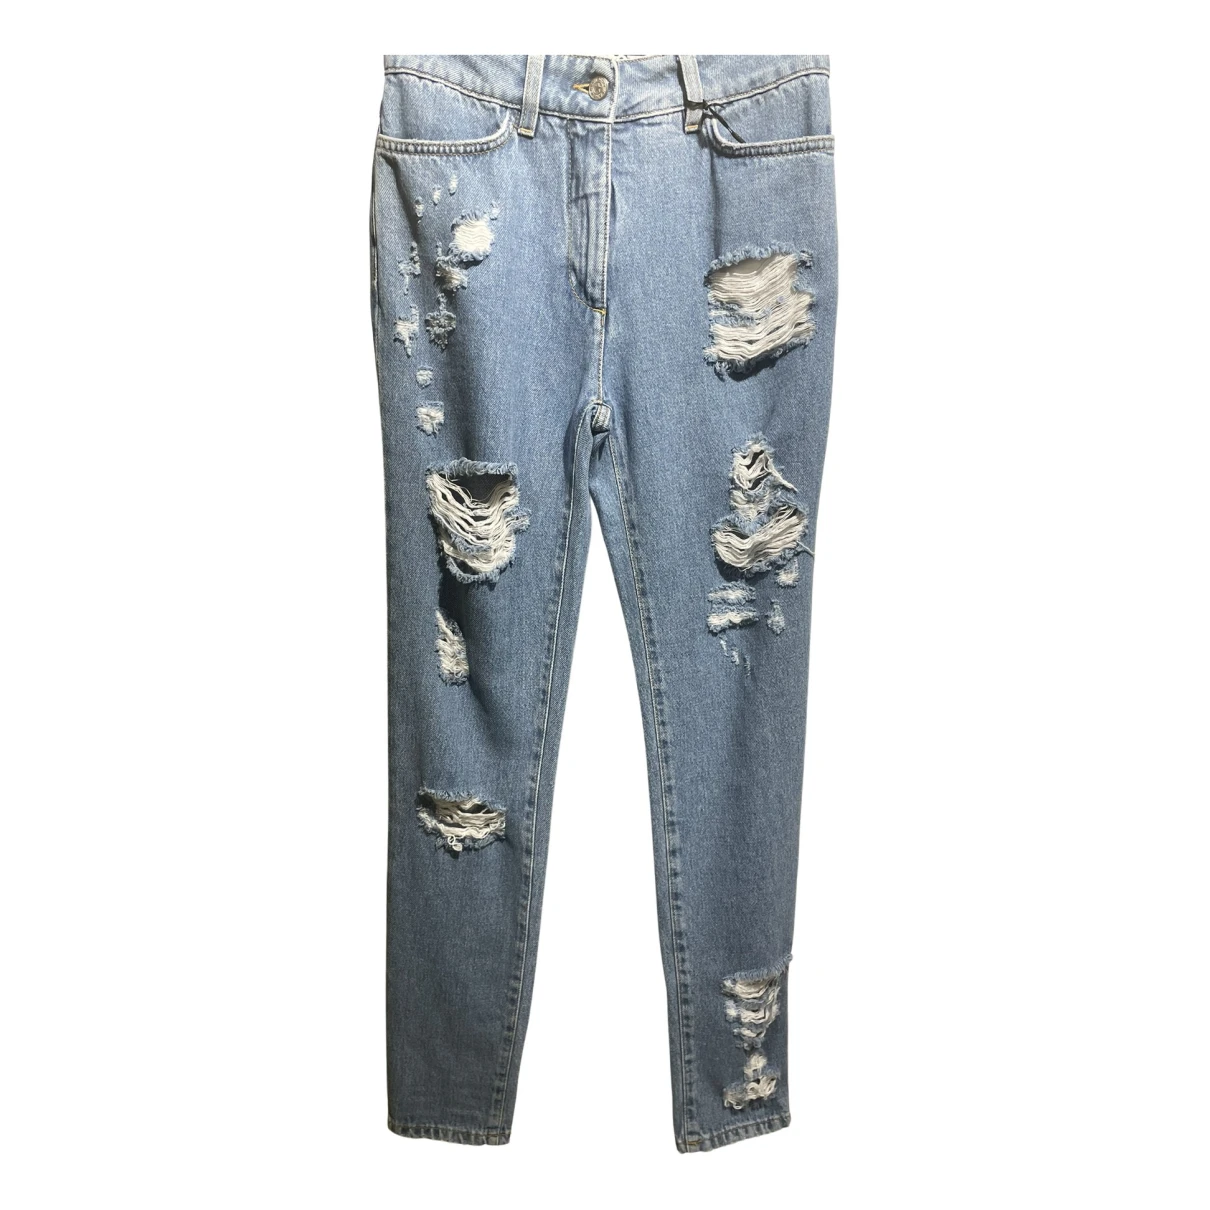 clothing Jeremy Scott trousers for Female Denim - Jeans 38 IT. Used condition